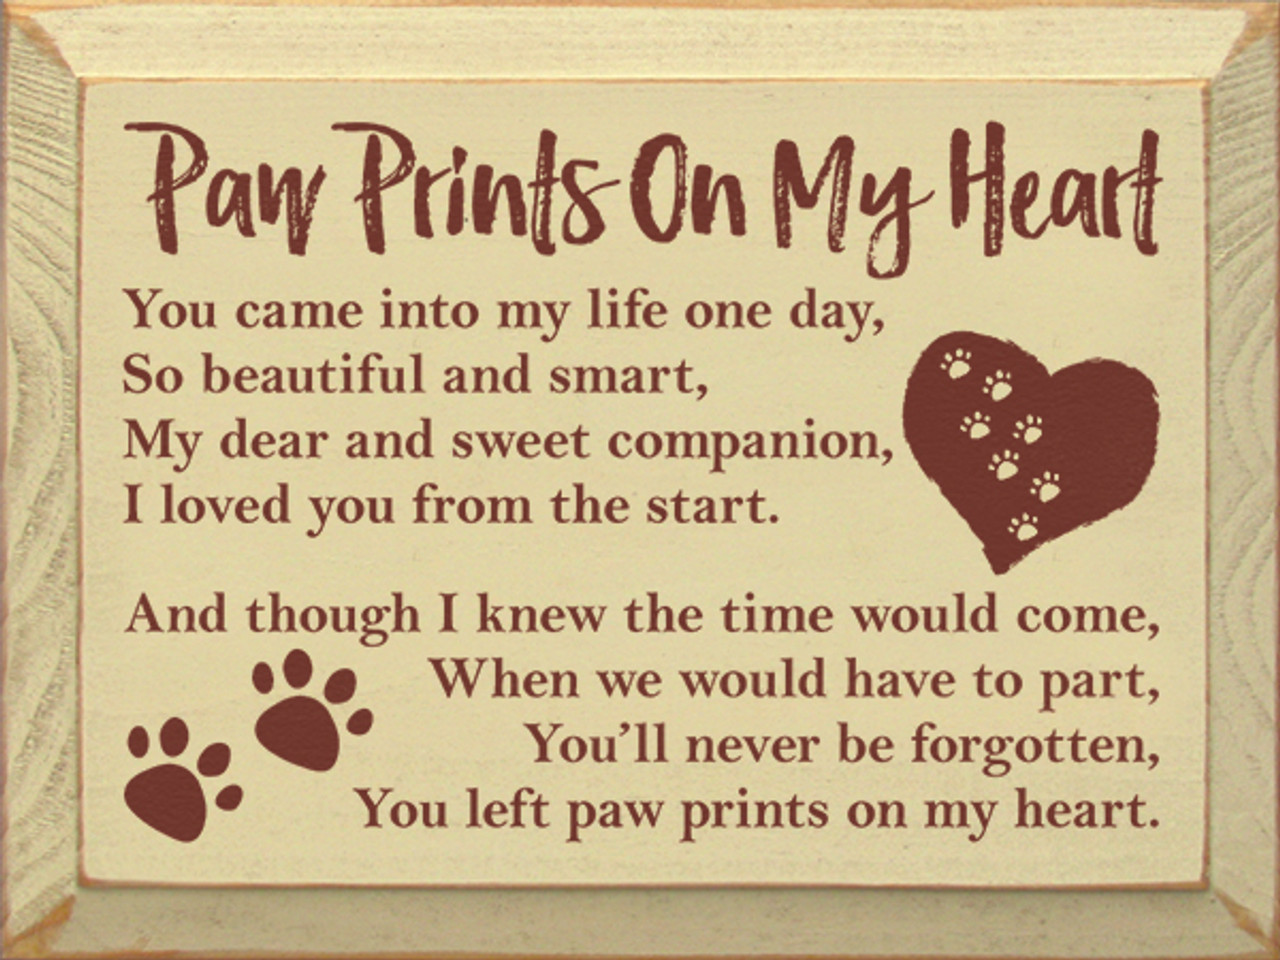 Hyret badminton dynasti Paw Prints On My Heart - You came into my life one day, so beautiful and  smart, my dear and sweet companion, I loved you from the start. And though  I knew